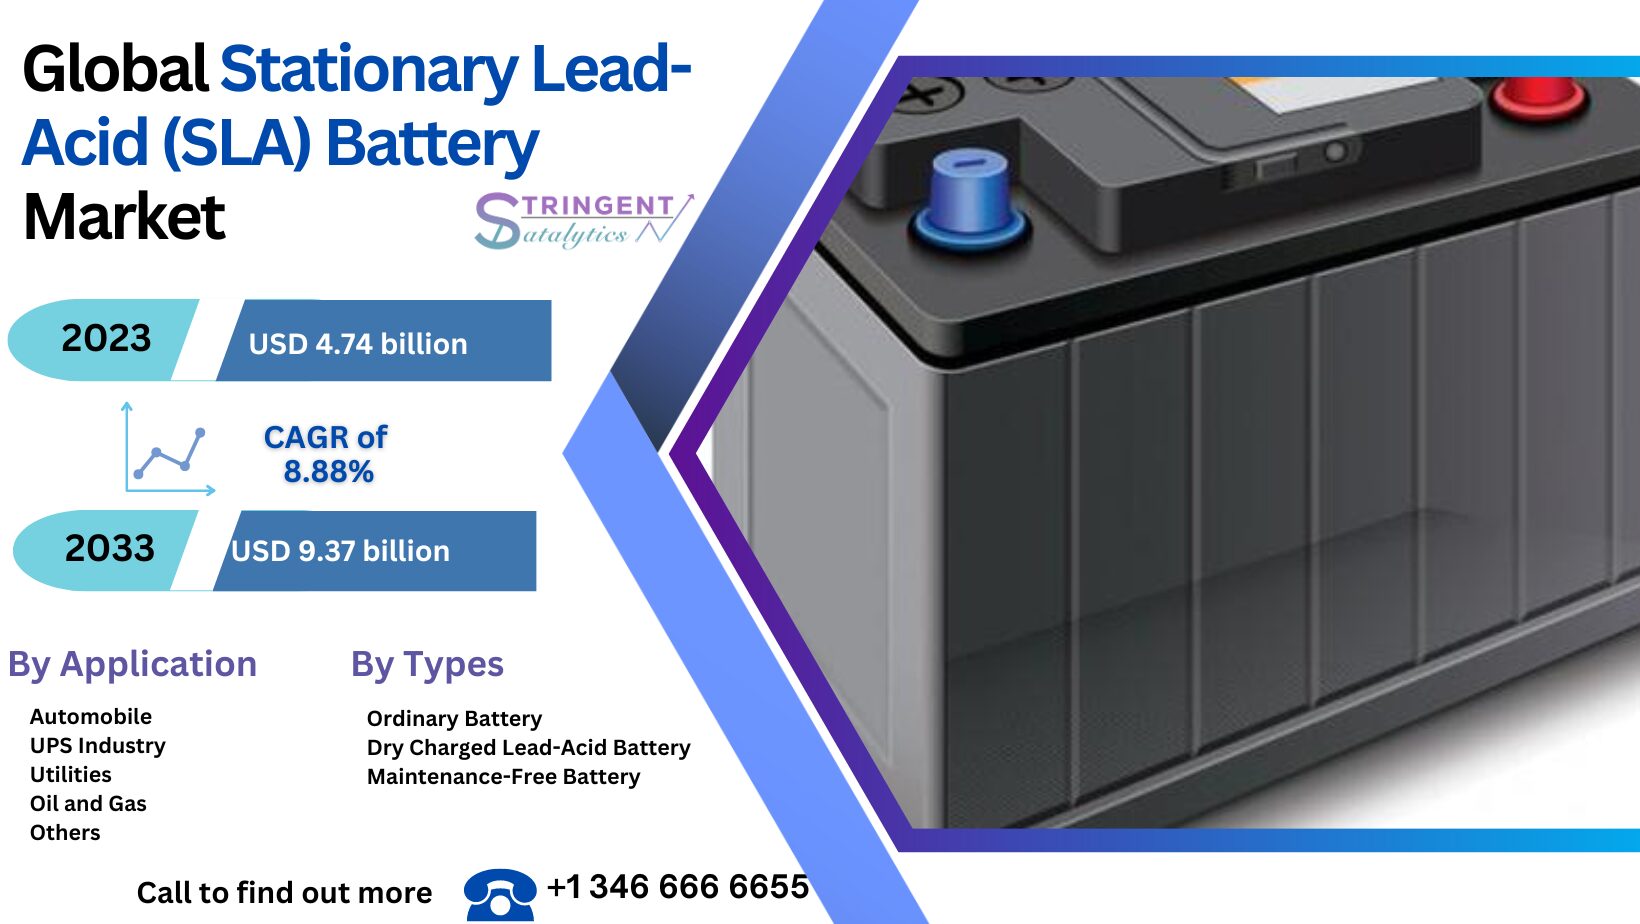 Stationary Lead-Acid (SLA) Battery Market Analysis Key Trends, Growth Opportunities, Challenges, Key Players, End User Demand and Forecasts to 2033